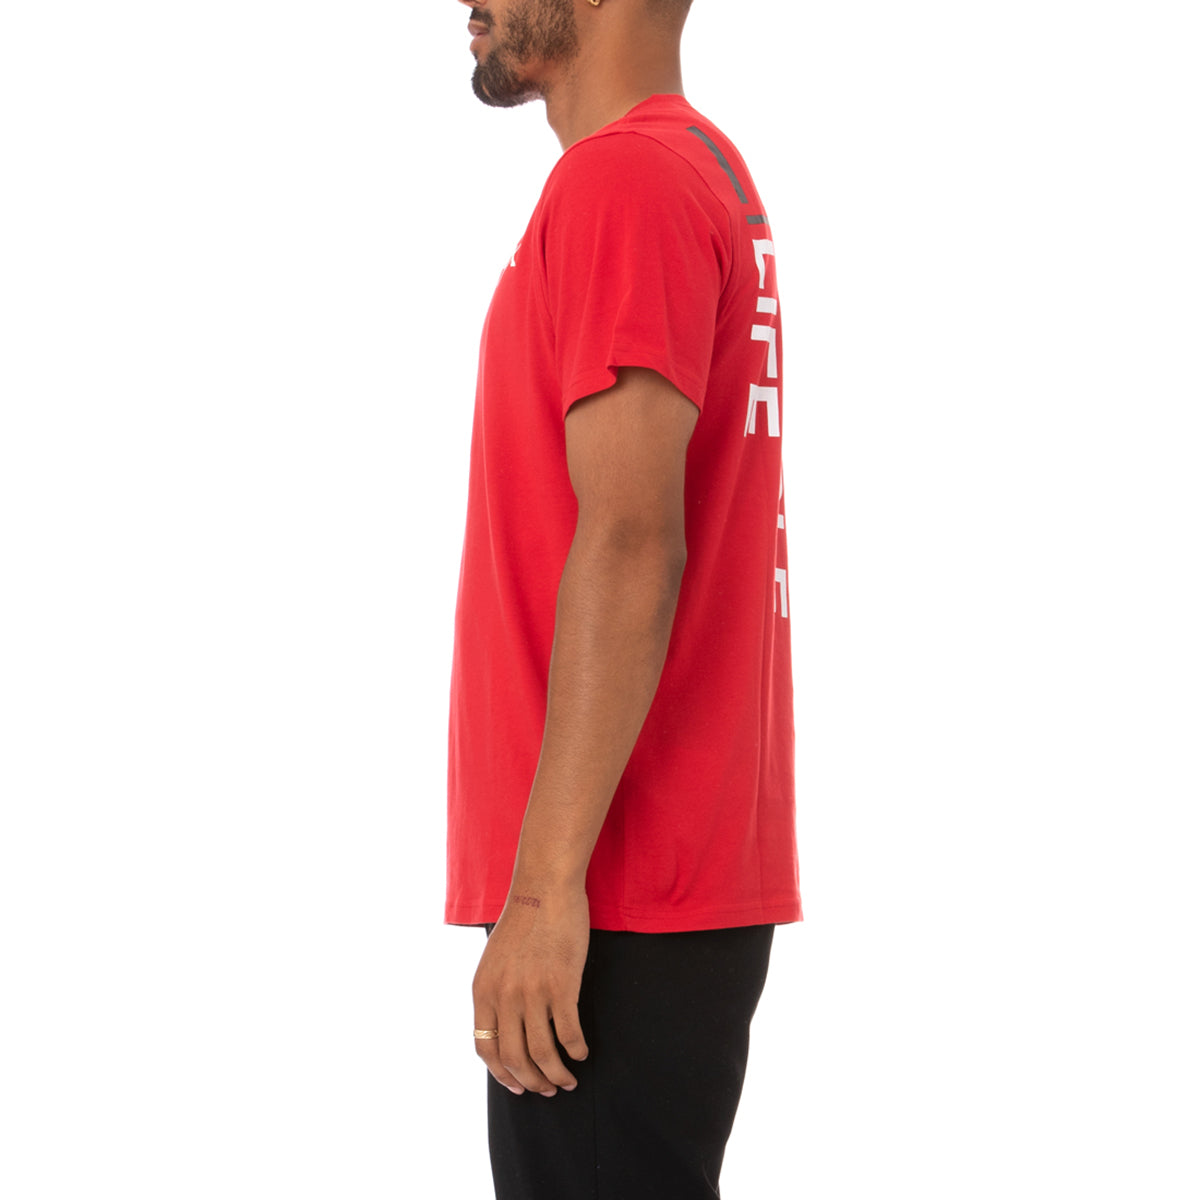 T-shirt Bytom Rouge homme - Image 3